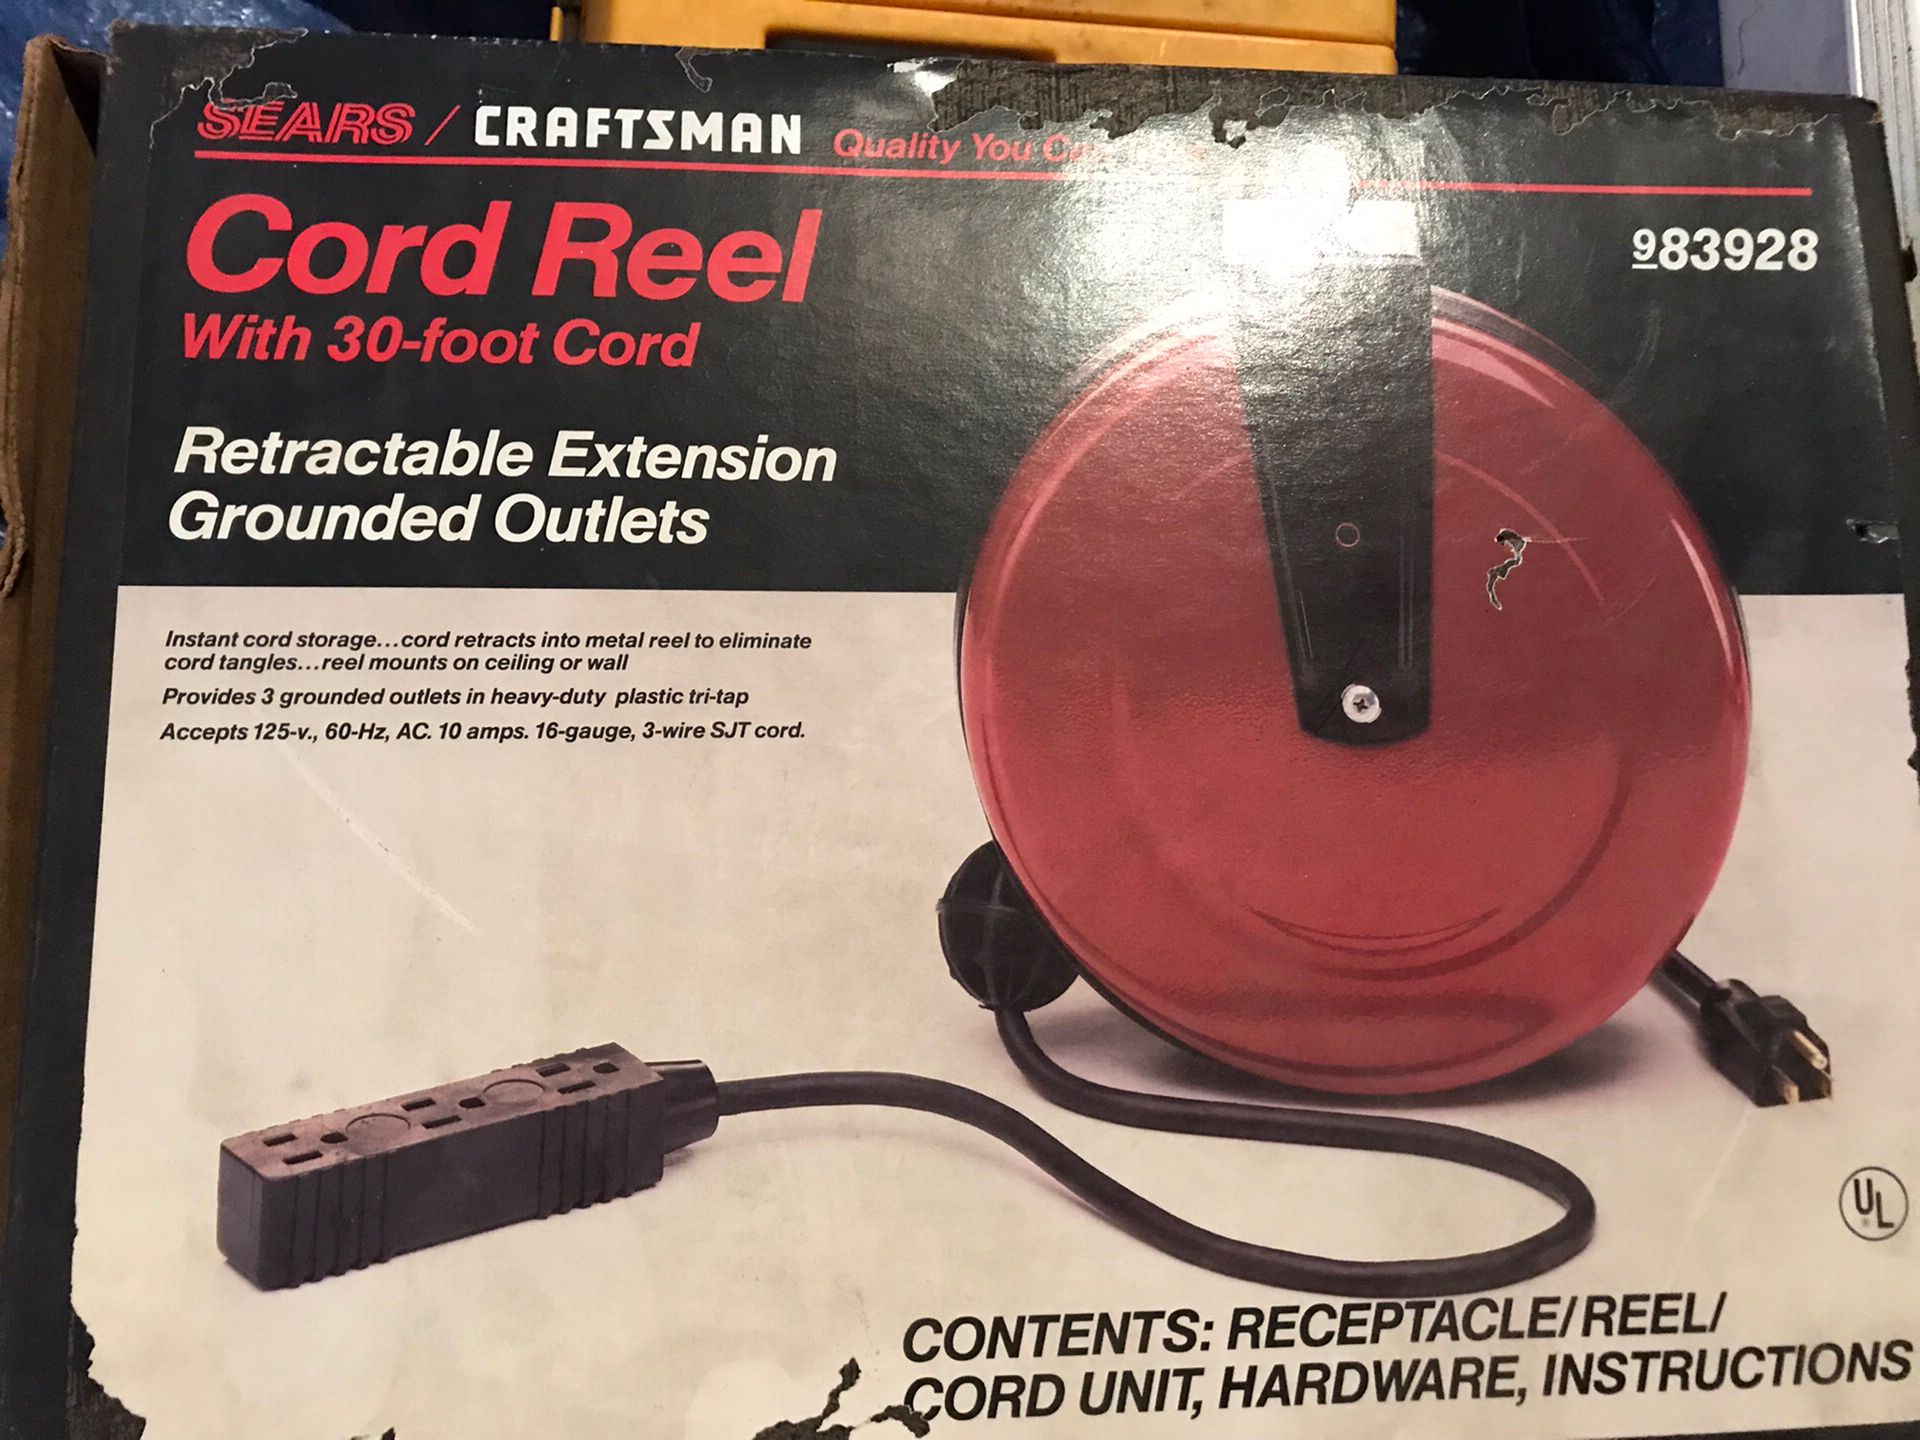 Sears /Craftsman Cord Reel W/30 Feet Chord New Original Box And Manual #83928  110V 10amps for Sale in Roselle, IL - OfferUp